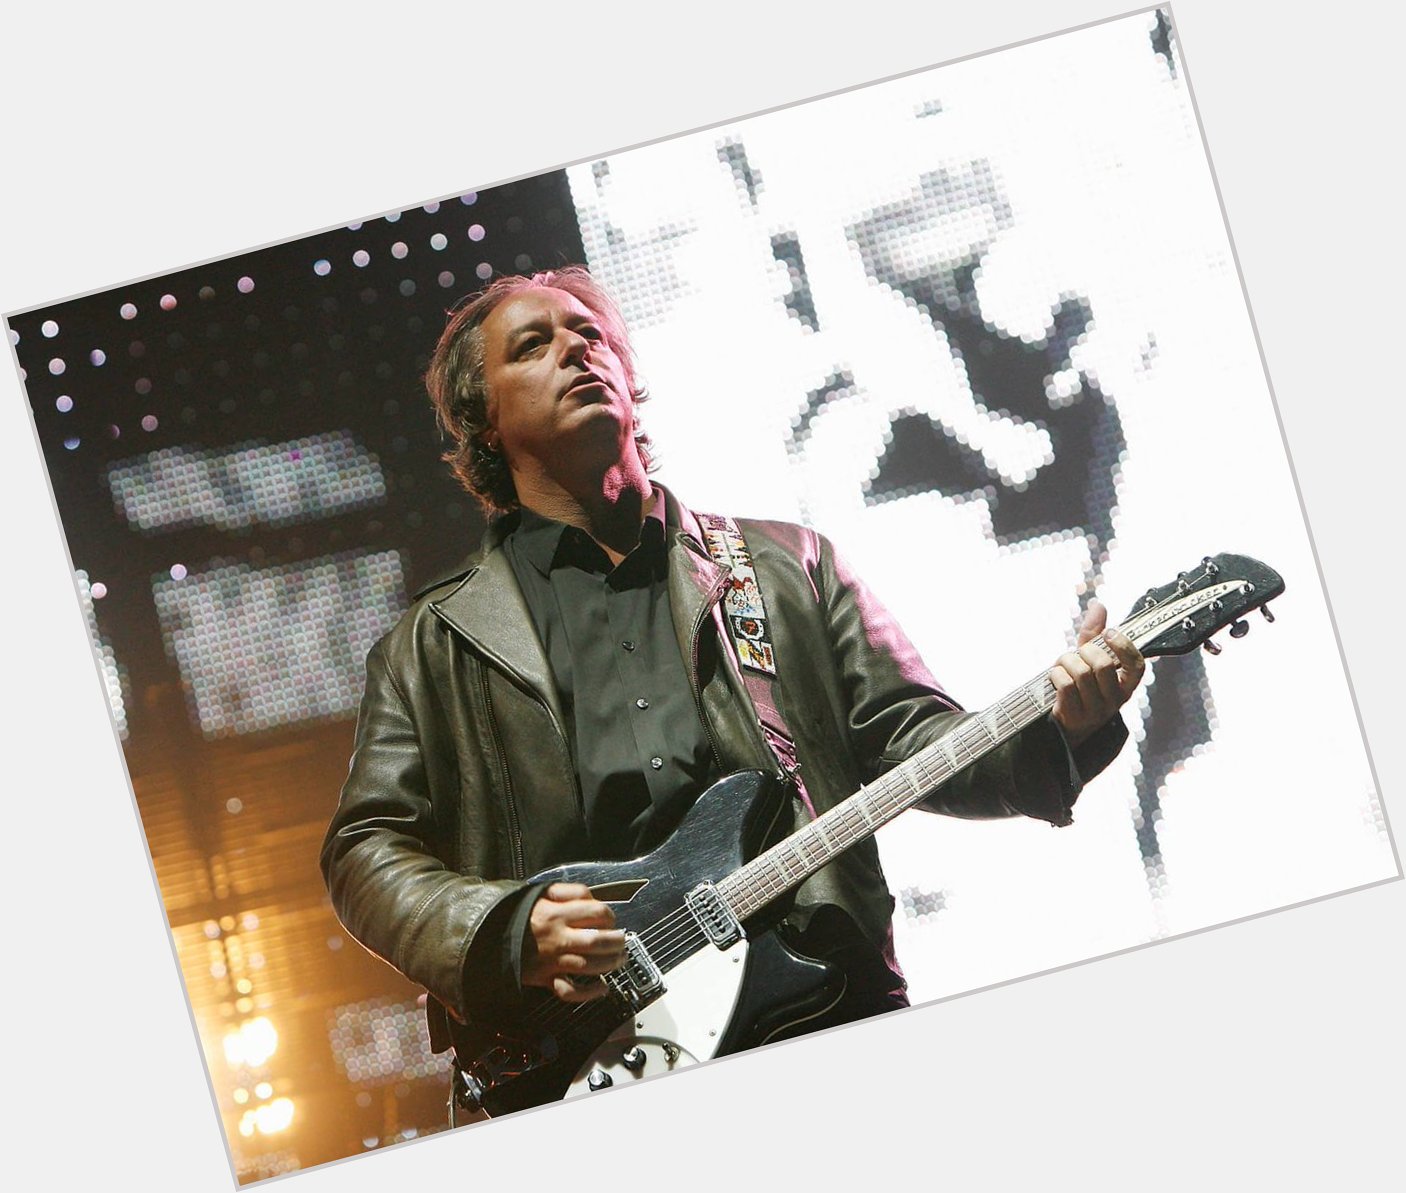 Also want to send big happy birthday wishes to REM s guitarist Peter Buck! 